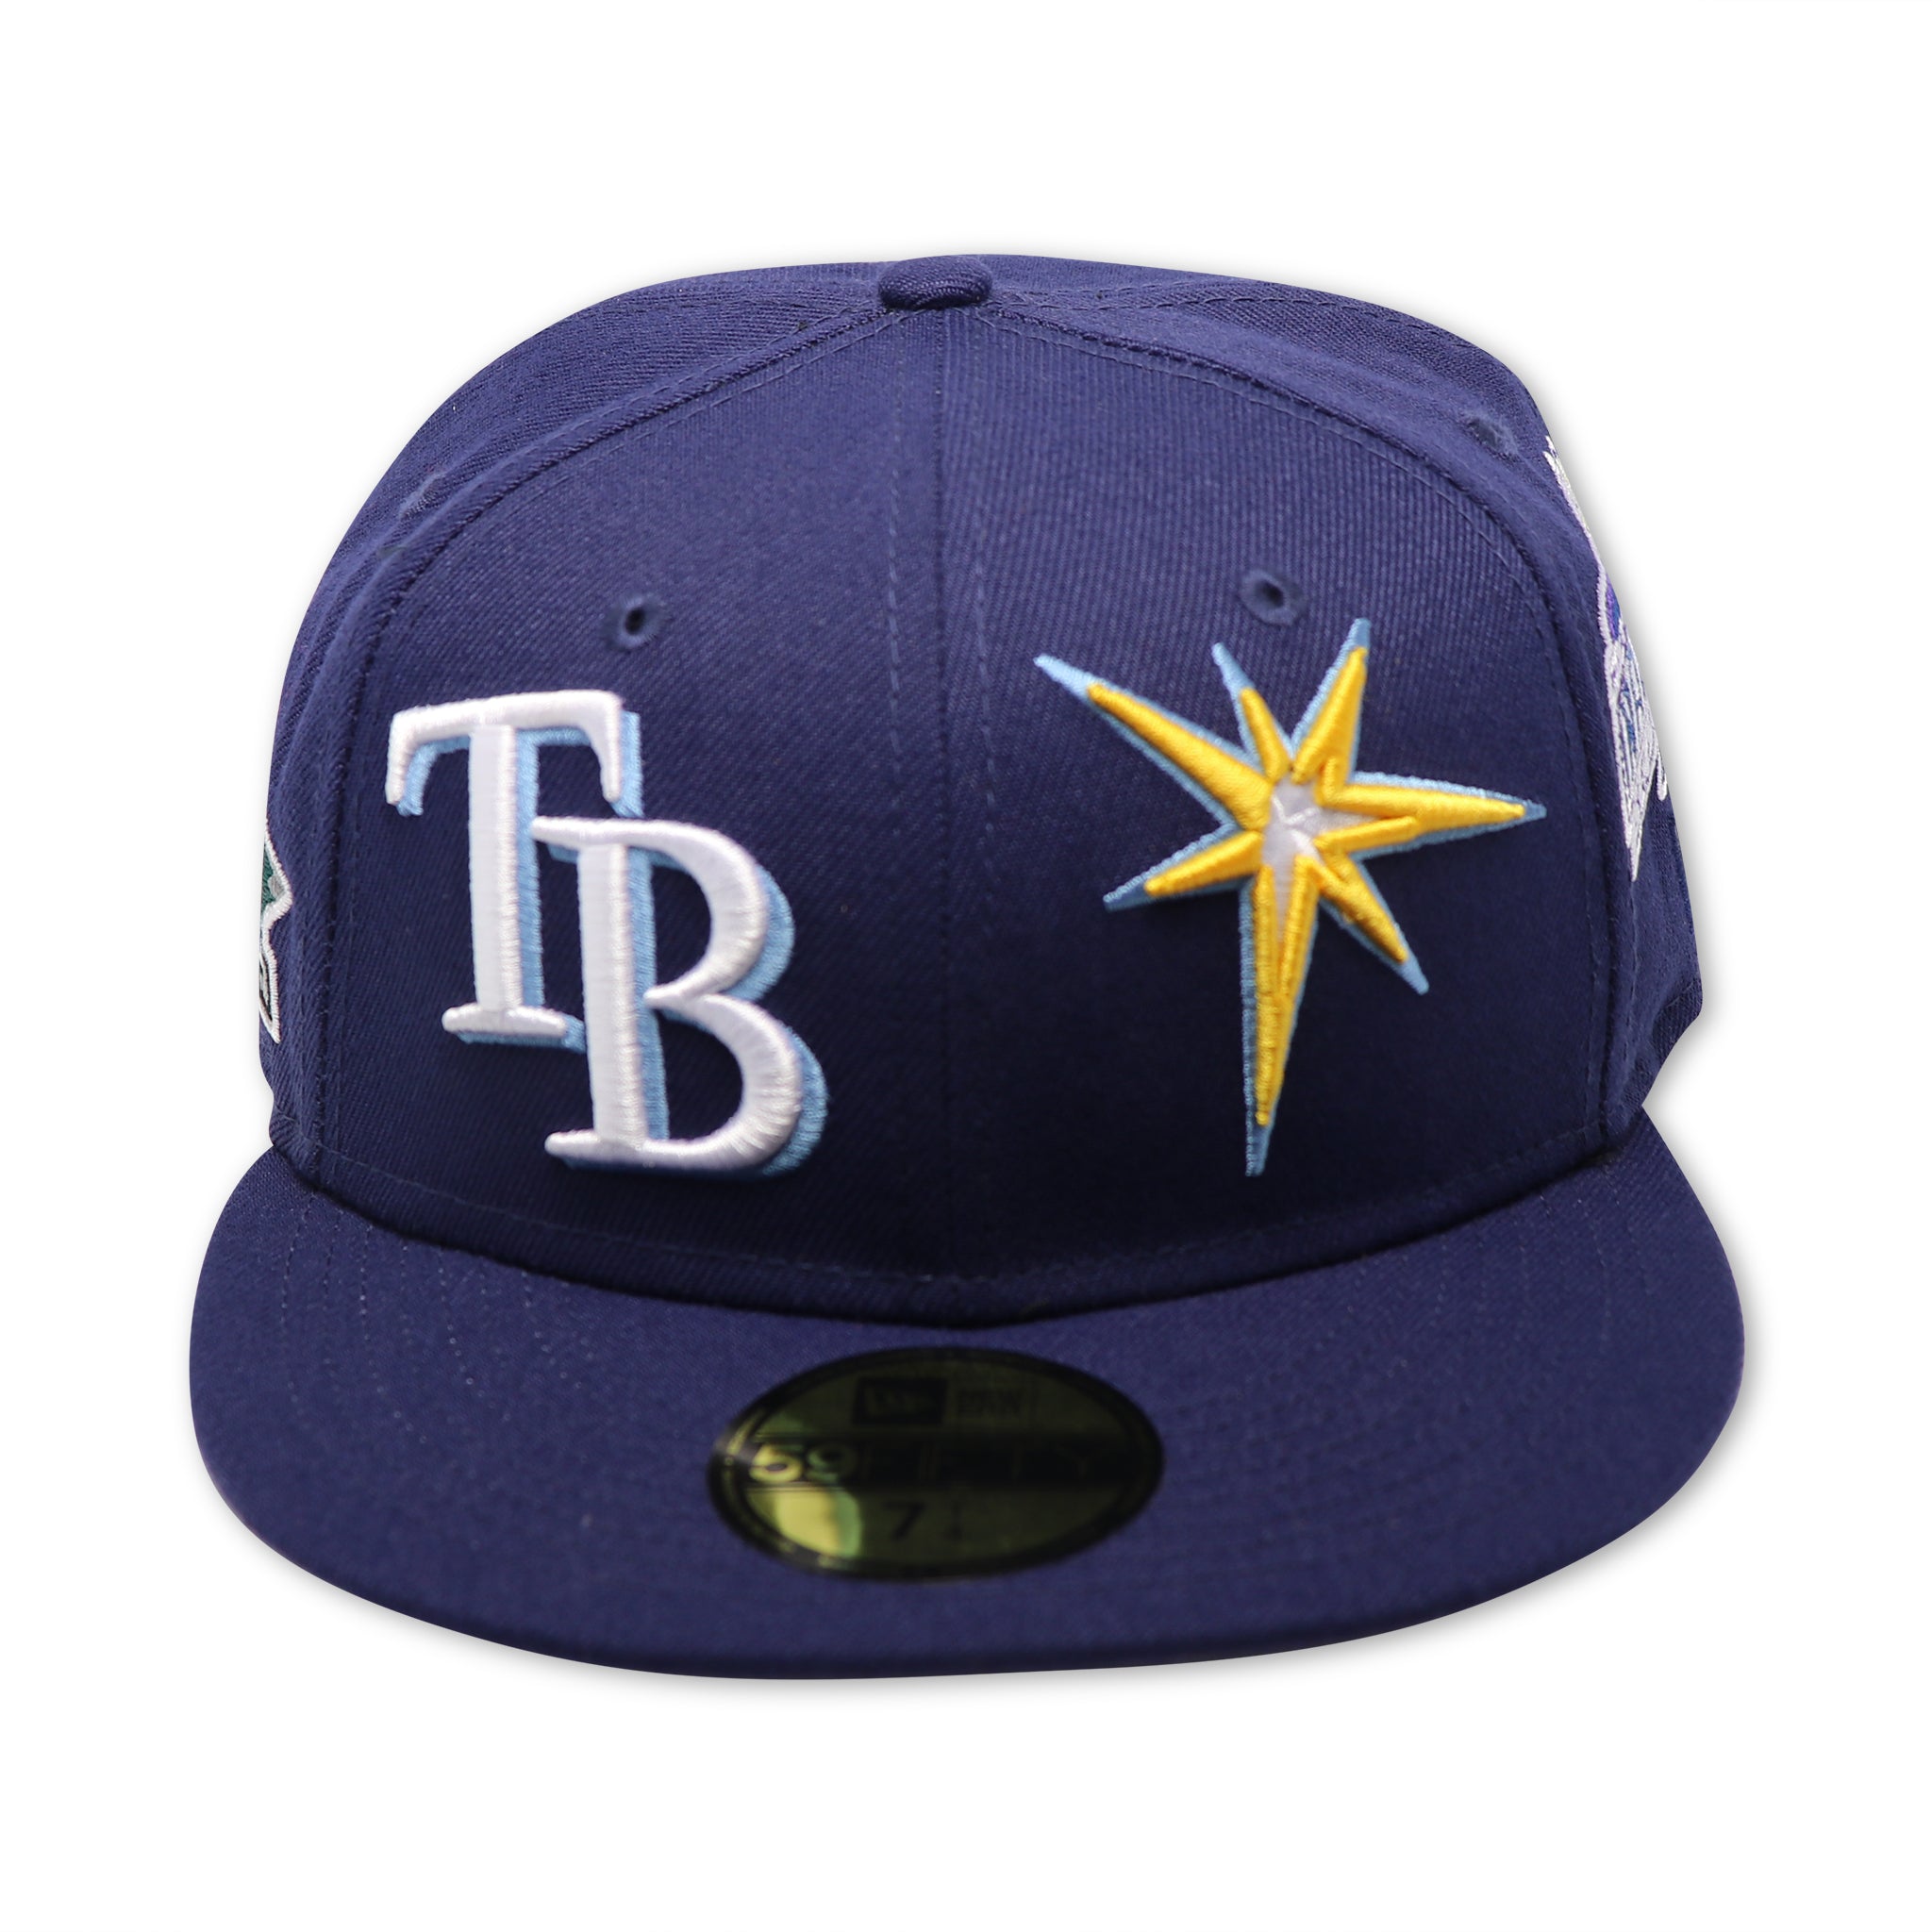 TAMPA BAY DEVIL RAYS (PATCH PRIDE) NEW ERA 59FIFTY FITTED